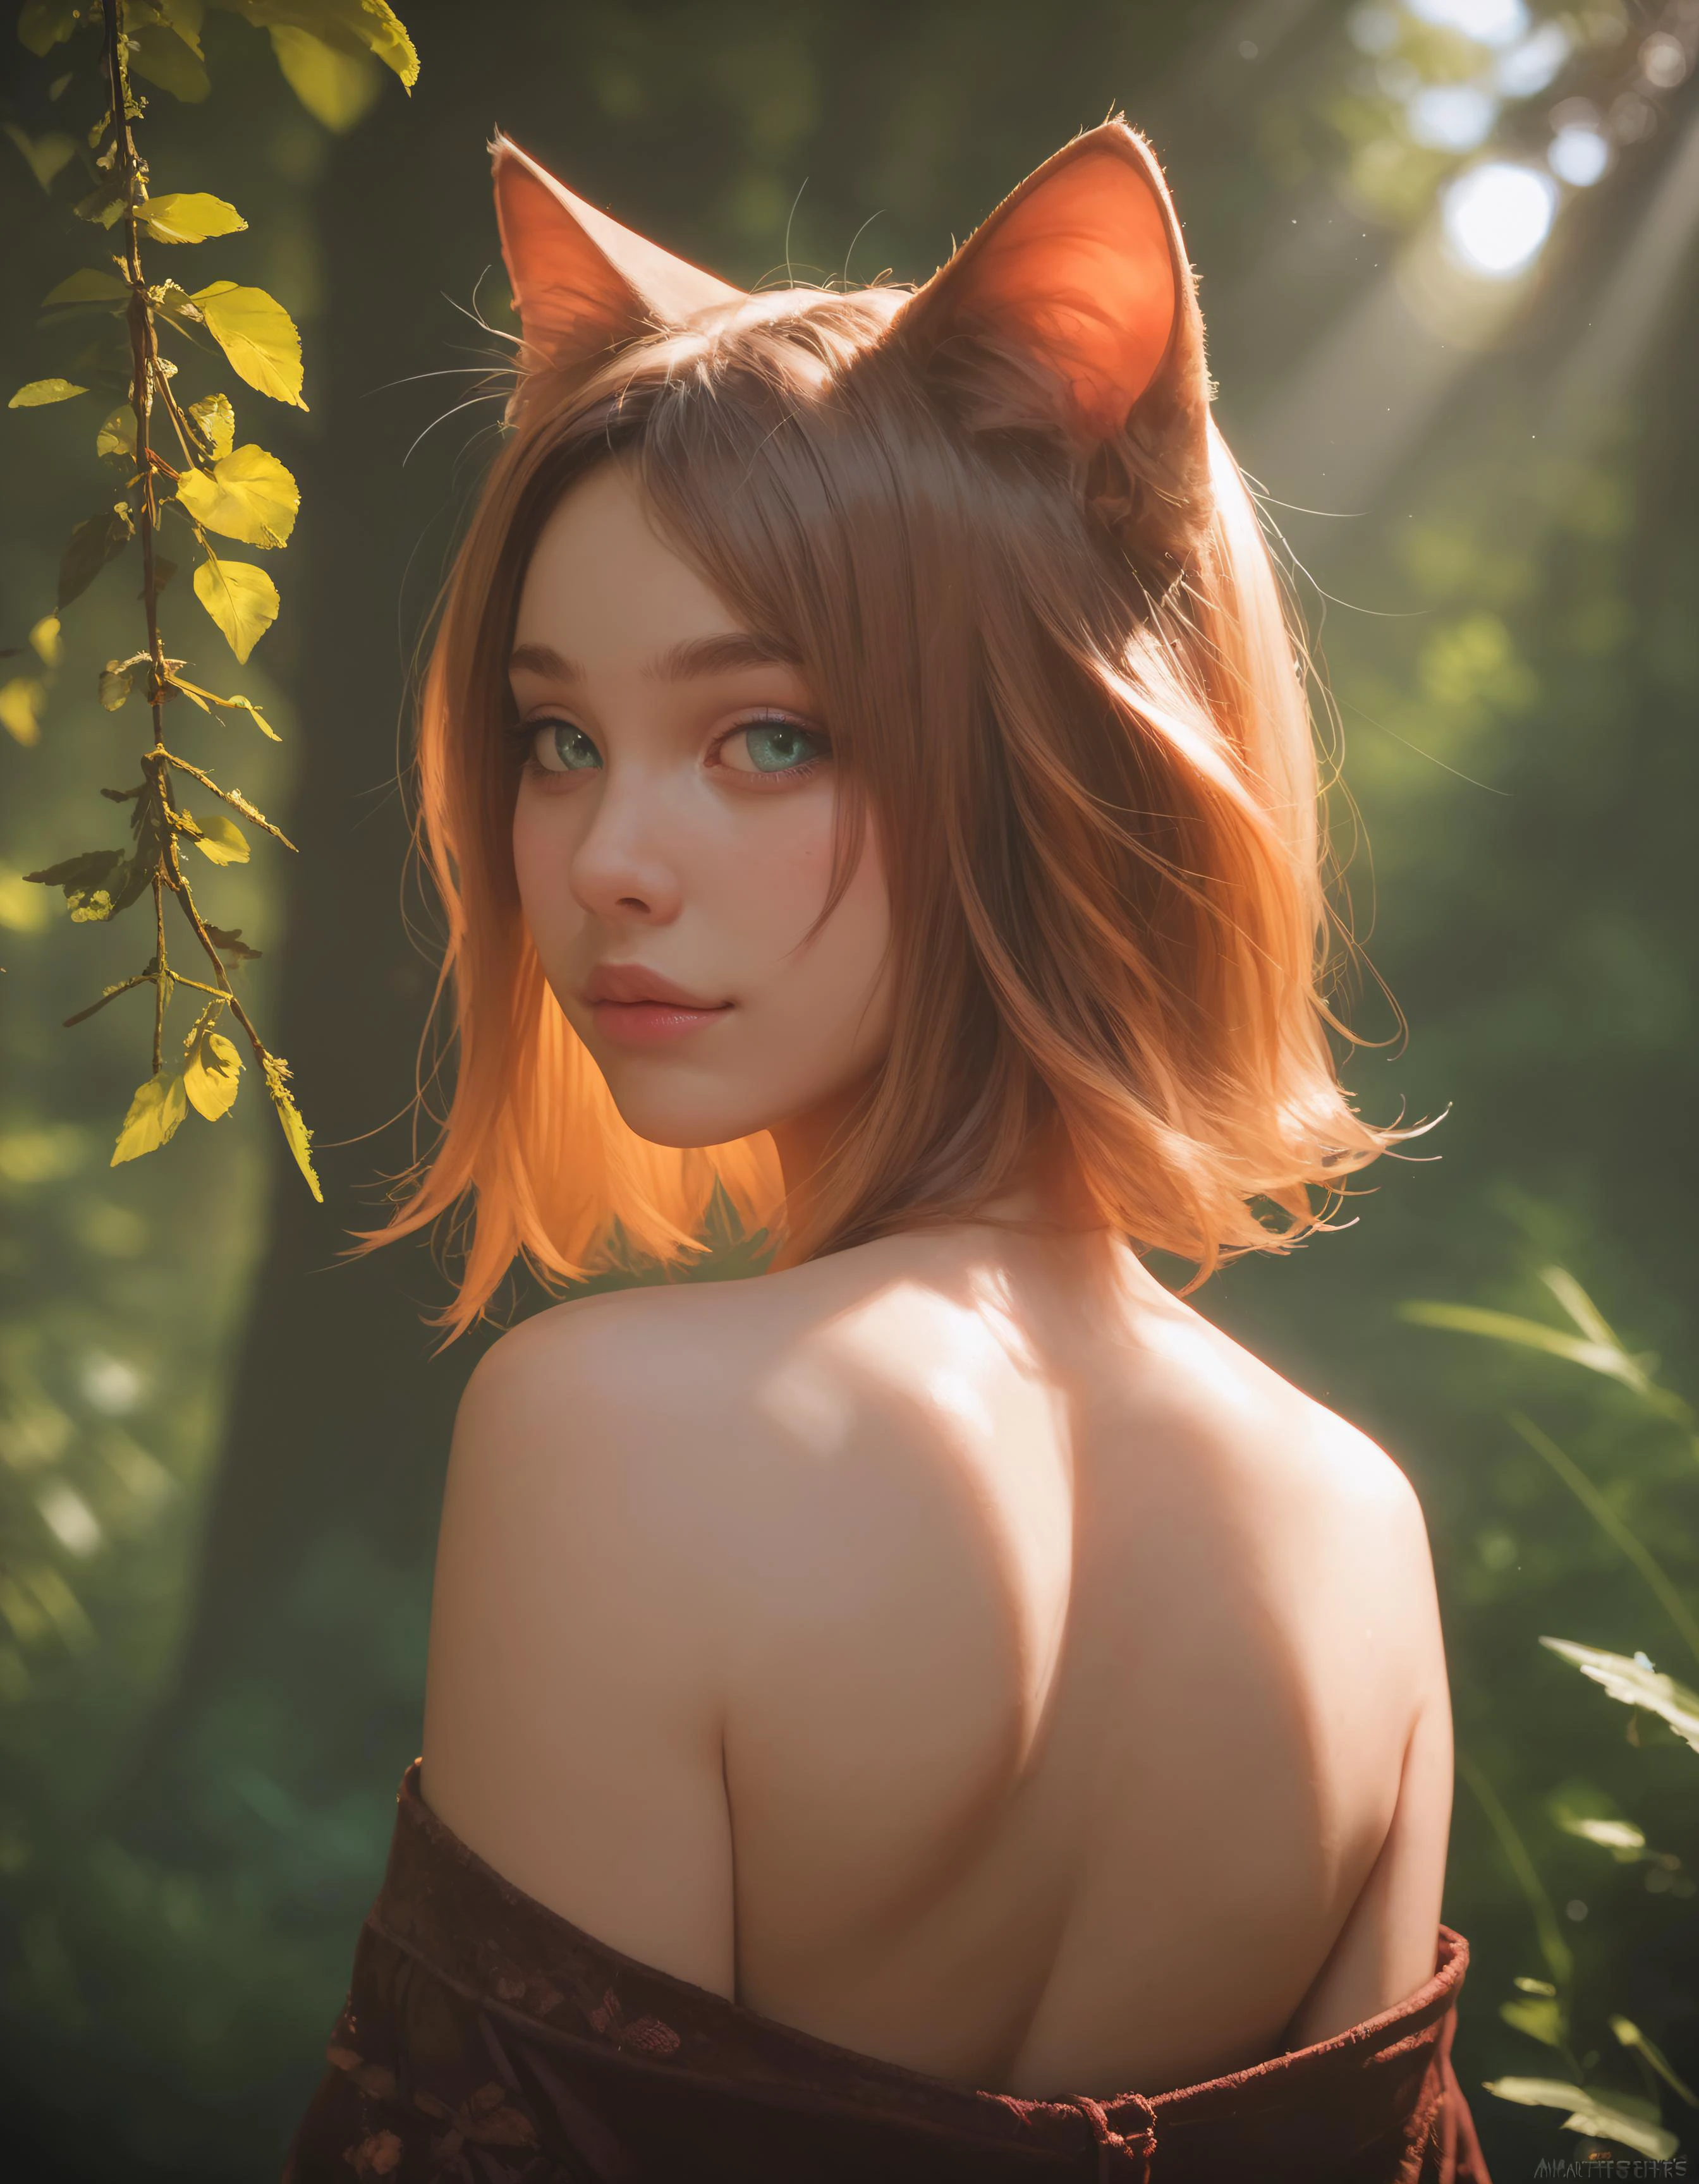 score_9, score_8_up, score_7_up, rating_questionable, rear, side, front, catgirl, kawaii, cute, , grab, wildling, translucent, glowing, dark, woods, rays, lovely, pure, g0th1cpxl, neon, masterpiece, best quality, highly detailed, realistic 